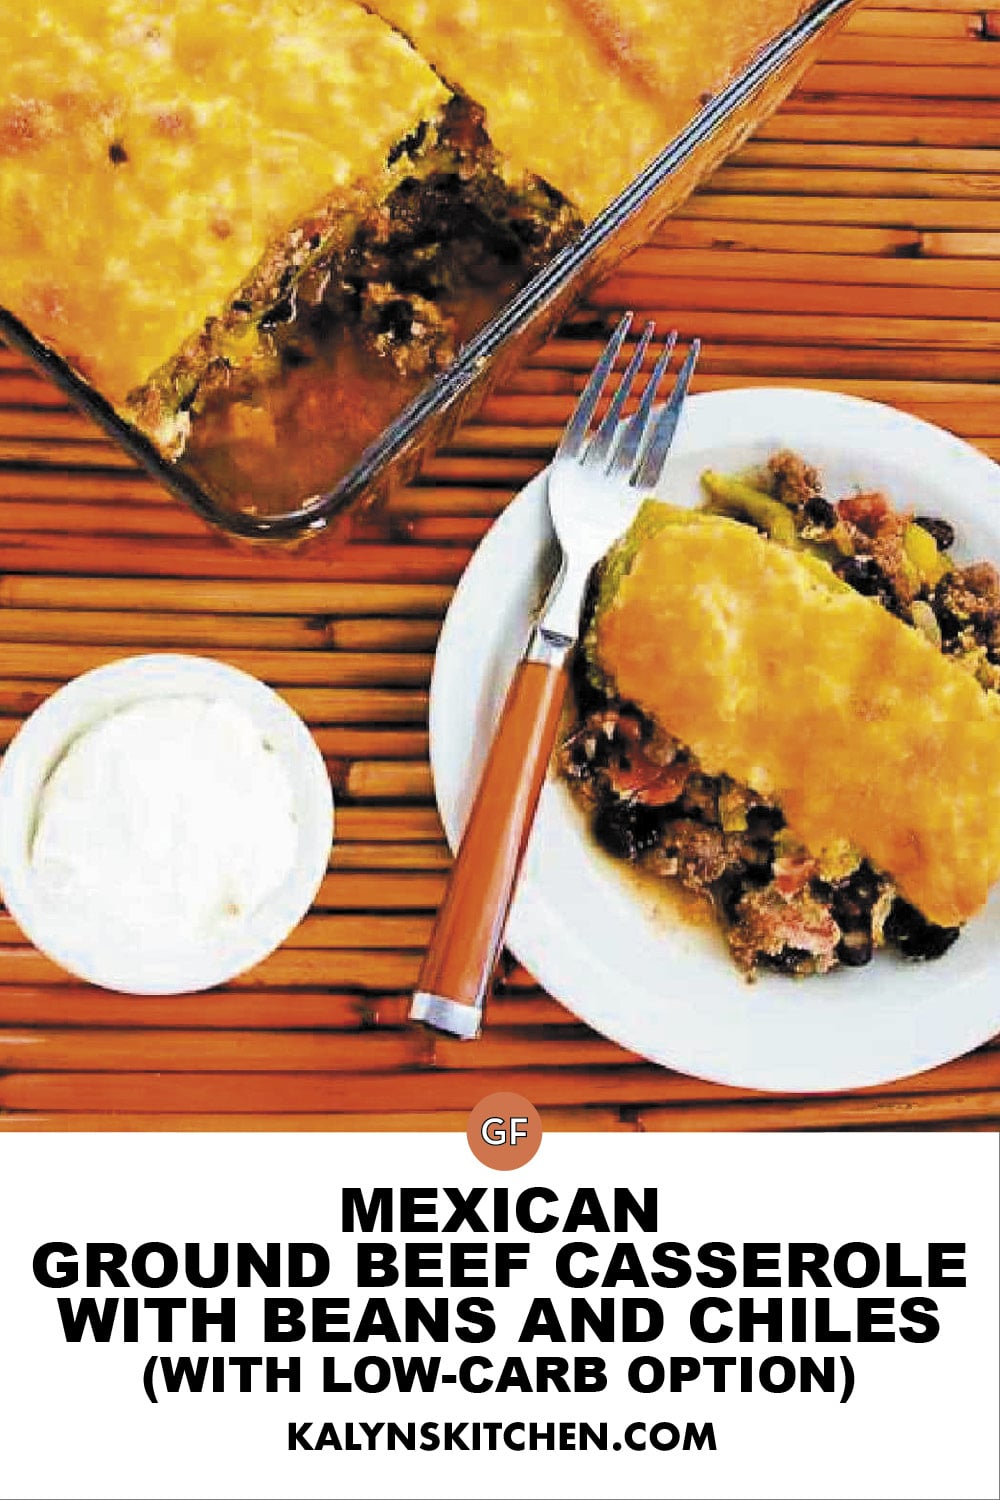 Pinterest image of Mexican Ground Beef Casserole with Beans and Chiles